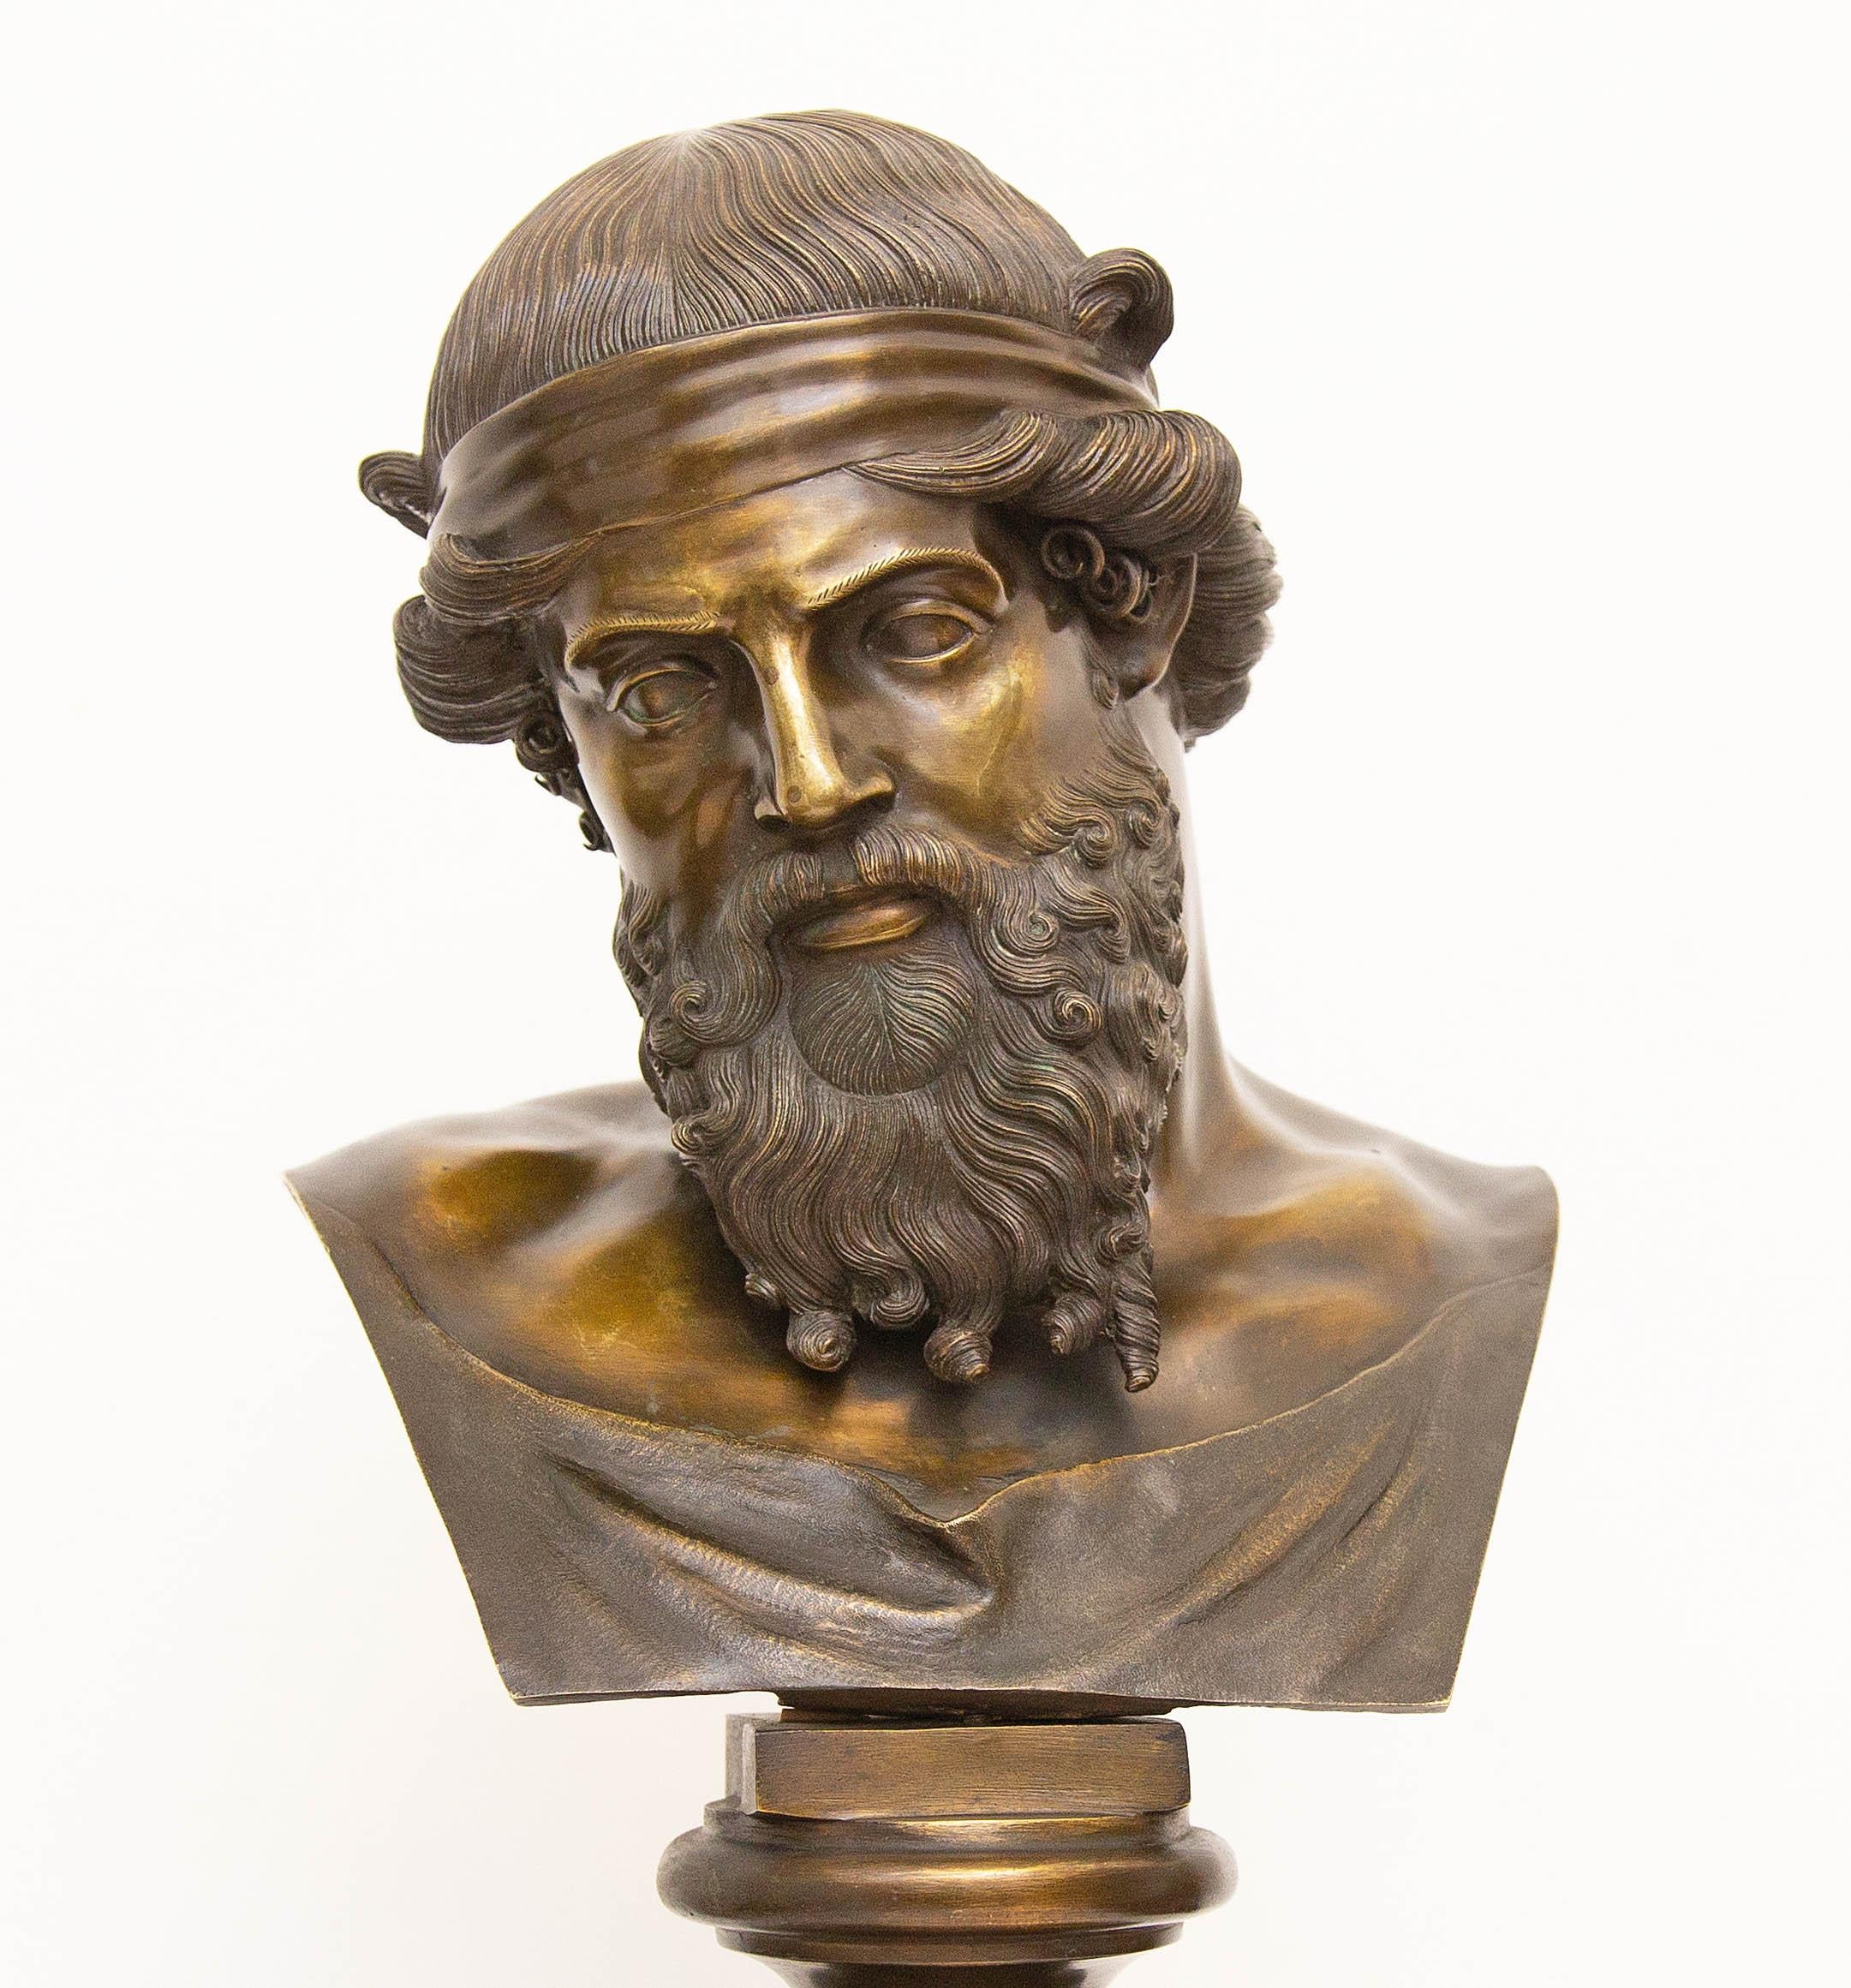 19th century patinated bronze bust of Plato. Mounted on later wood base. After the original found at Herculaneum, Villa of the Papyri, in 1759. The sculpture at times has also been identified as Dionysos and Priapus.